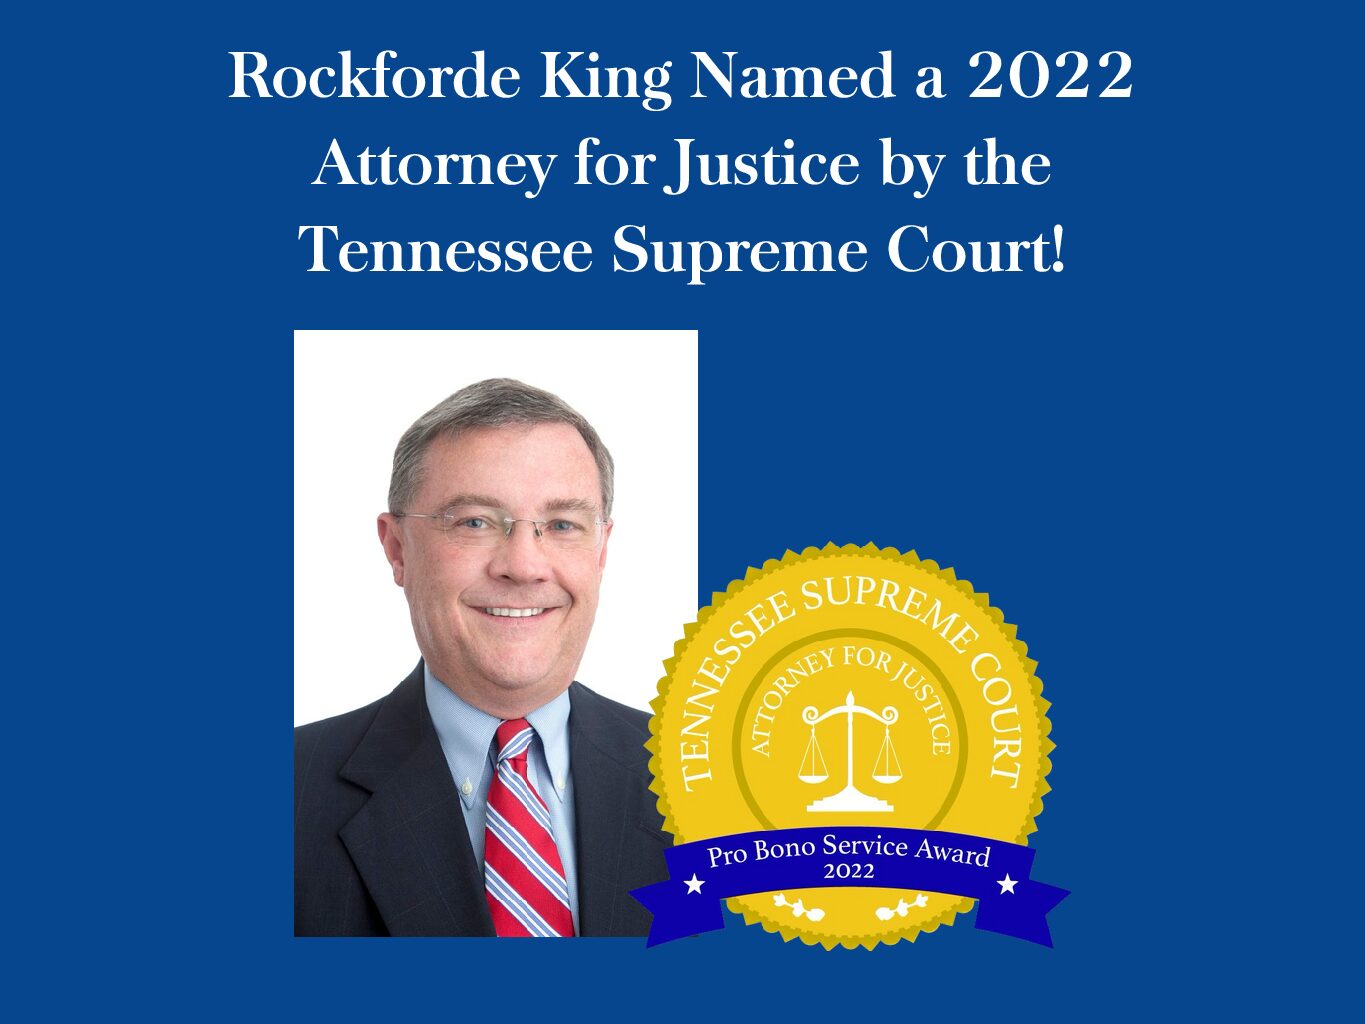 Rockforde King Named a 2022 Attorney for Justice